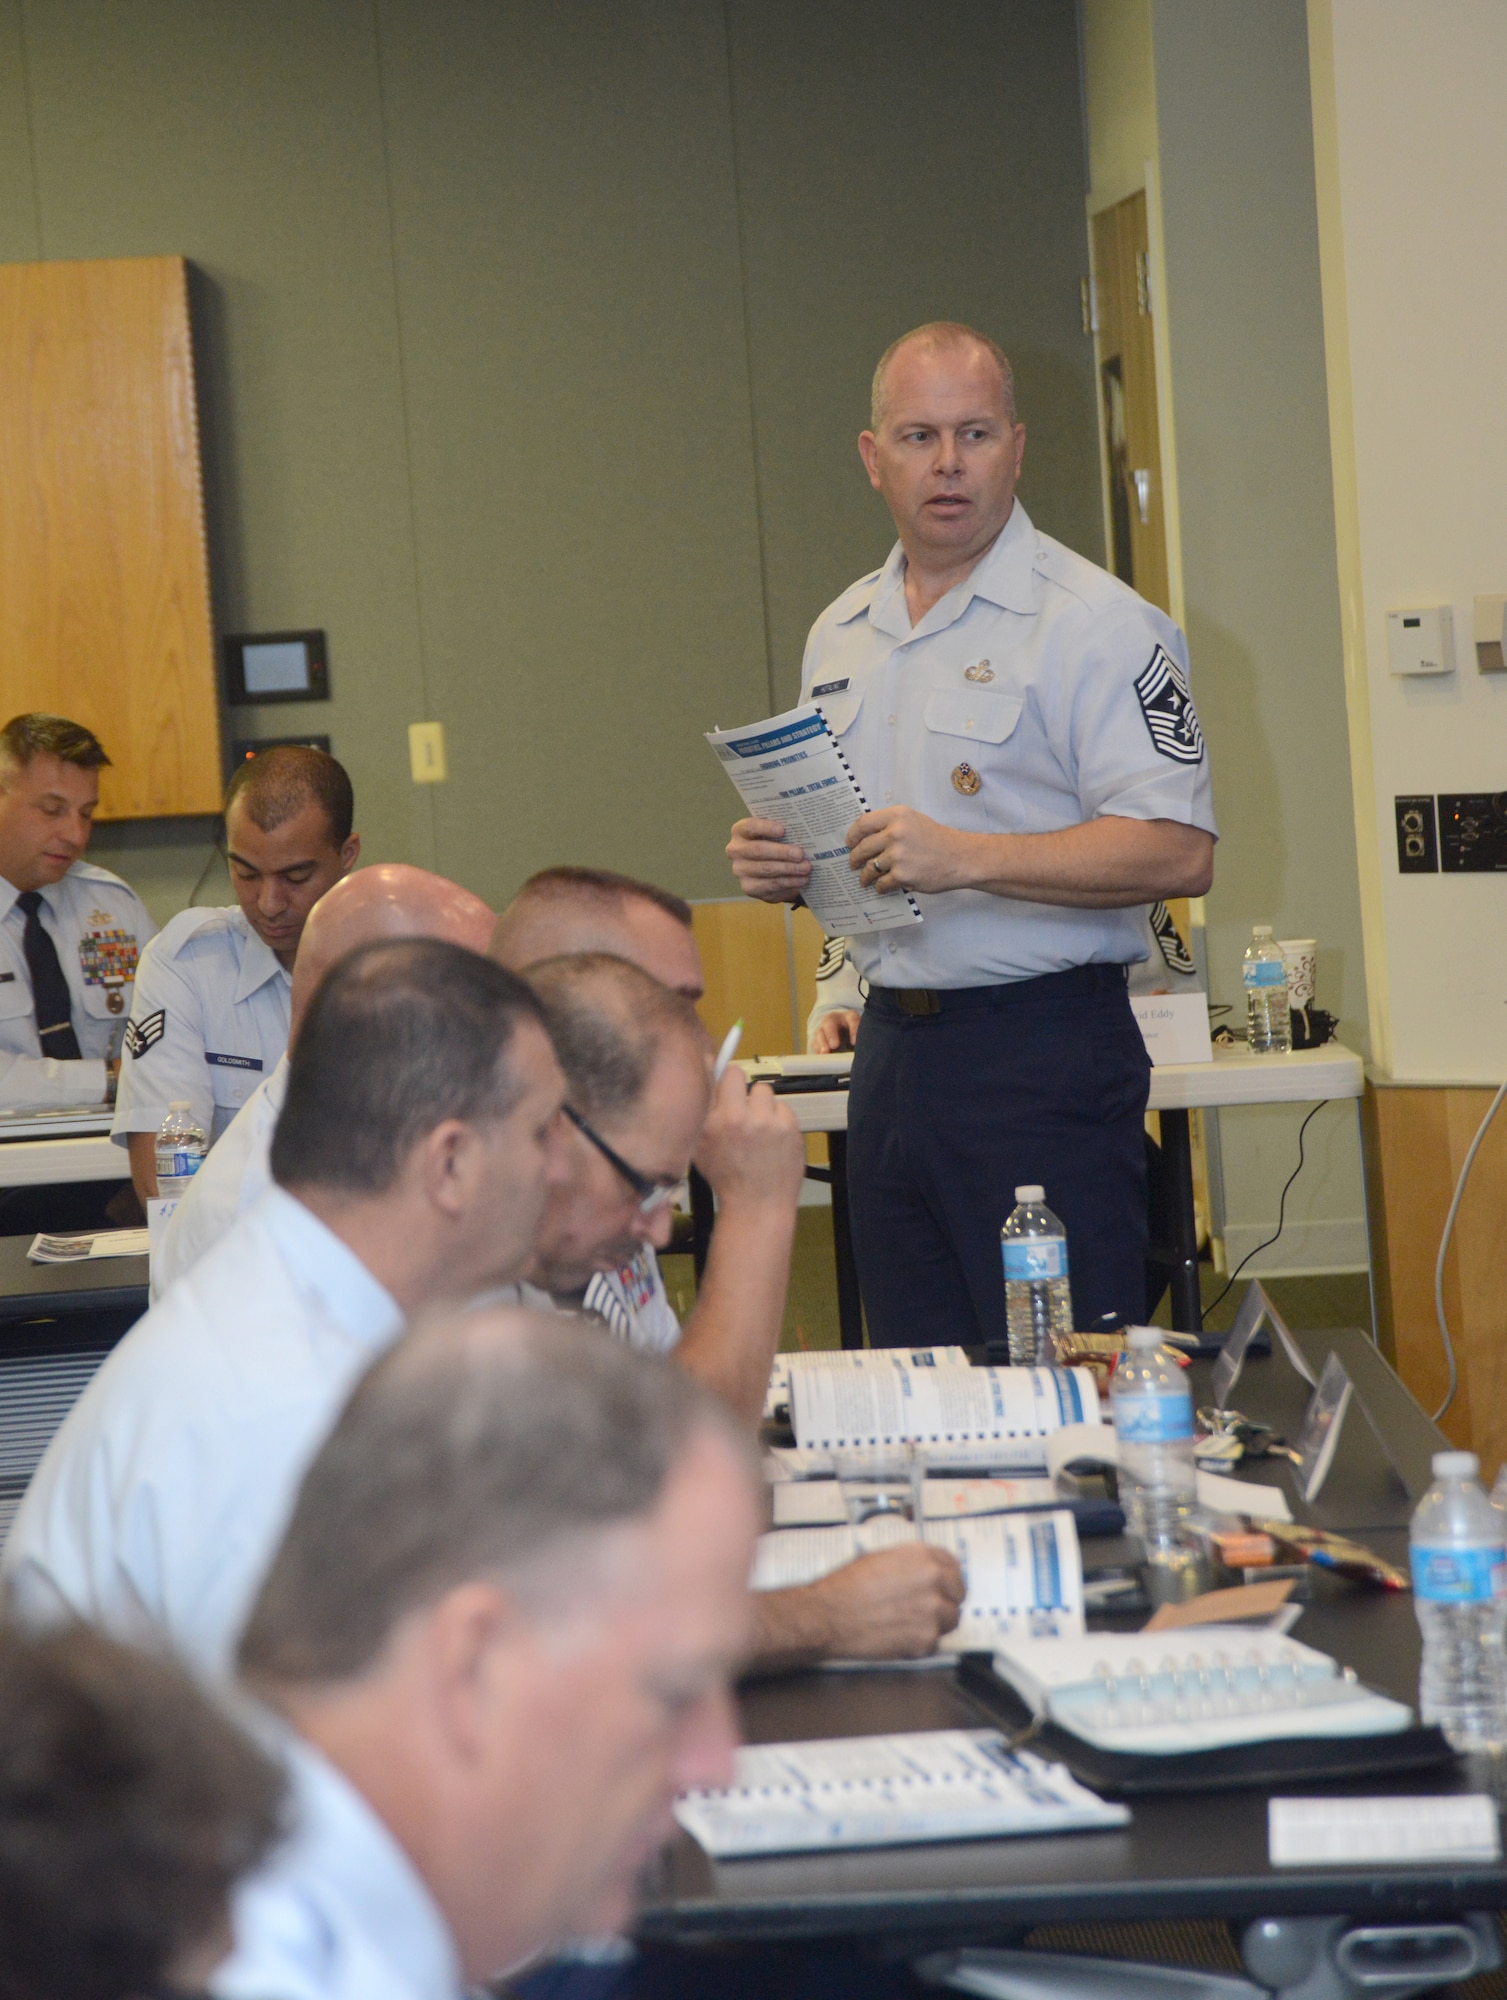 Air National Guard Command Chief James W. Hotaling discusses his Aim Points with the Chief's Executive Course at the Air National Guard Readiness Center on Joint Base Andrews, Md. The course, part of Focus on the Force Week, is designed to introduce newly-promoted chief master sergeants to their new roles. (U.S. Air National Guard photo by Senior Airman John E. Hillier/Released)